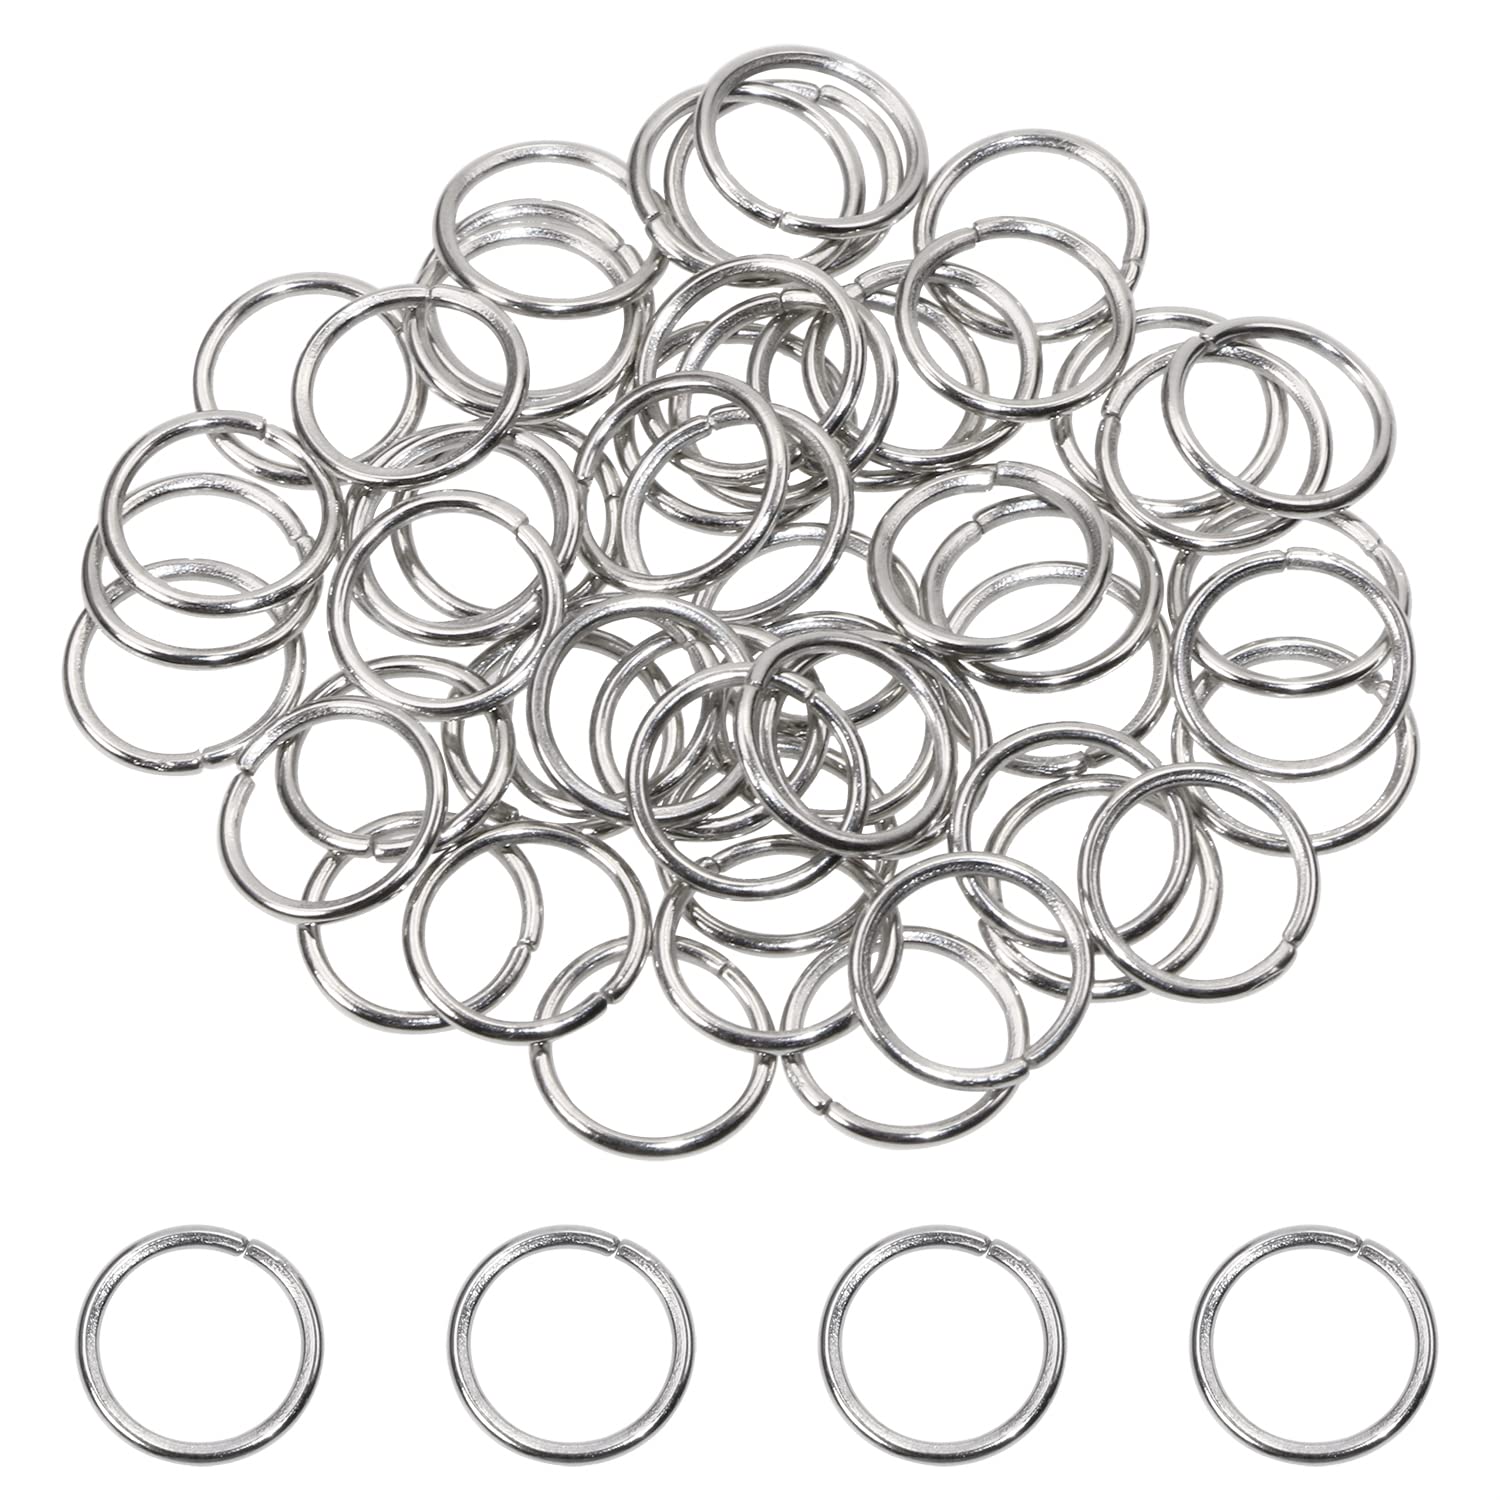 Silver Metal Open Jump Rings Jewelry DIY Findings for Crafts Choker  Necklaces Bracelet Making Accessories 